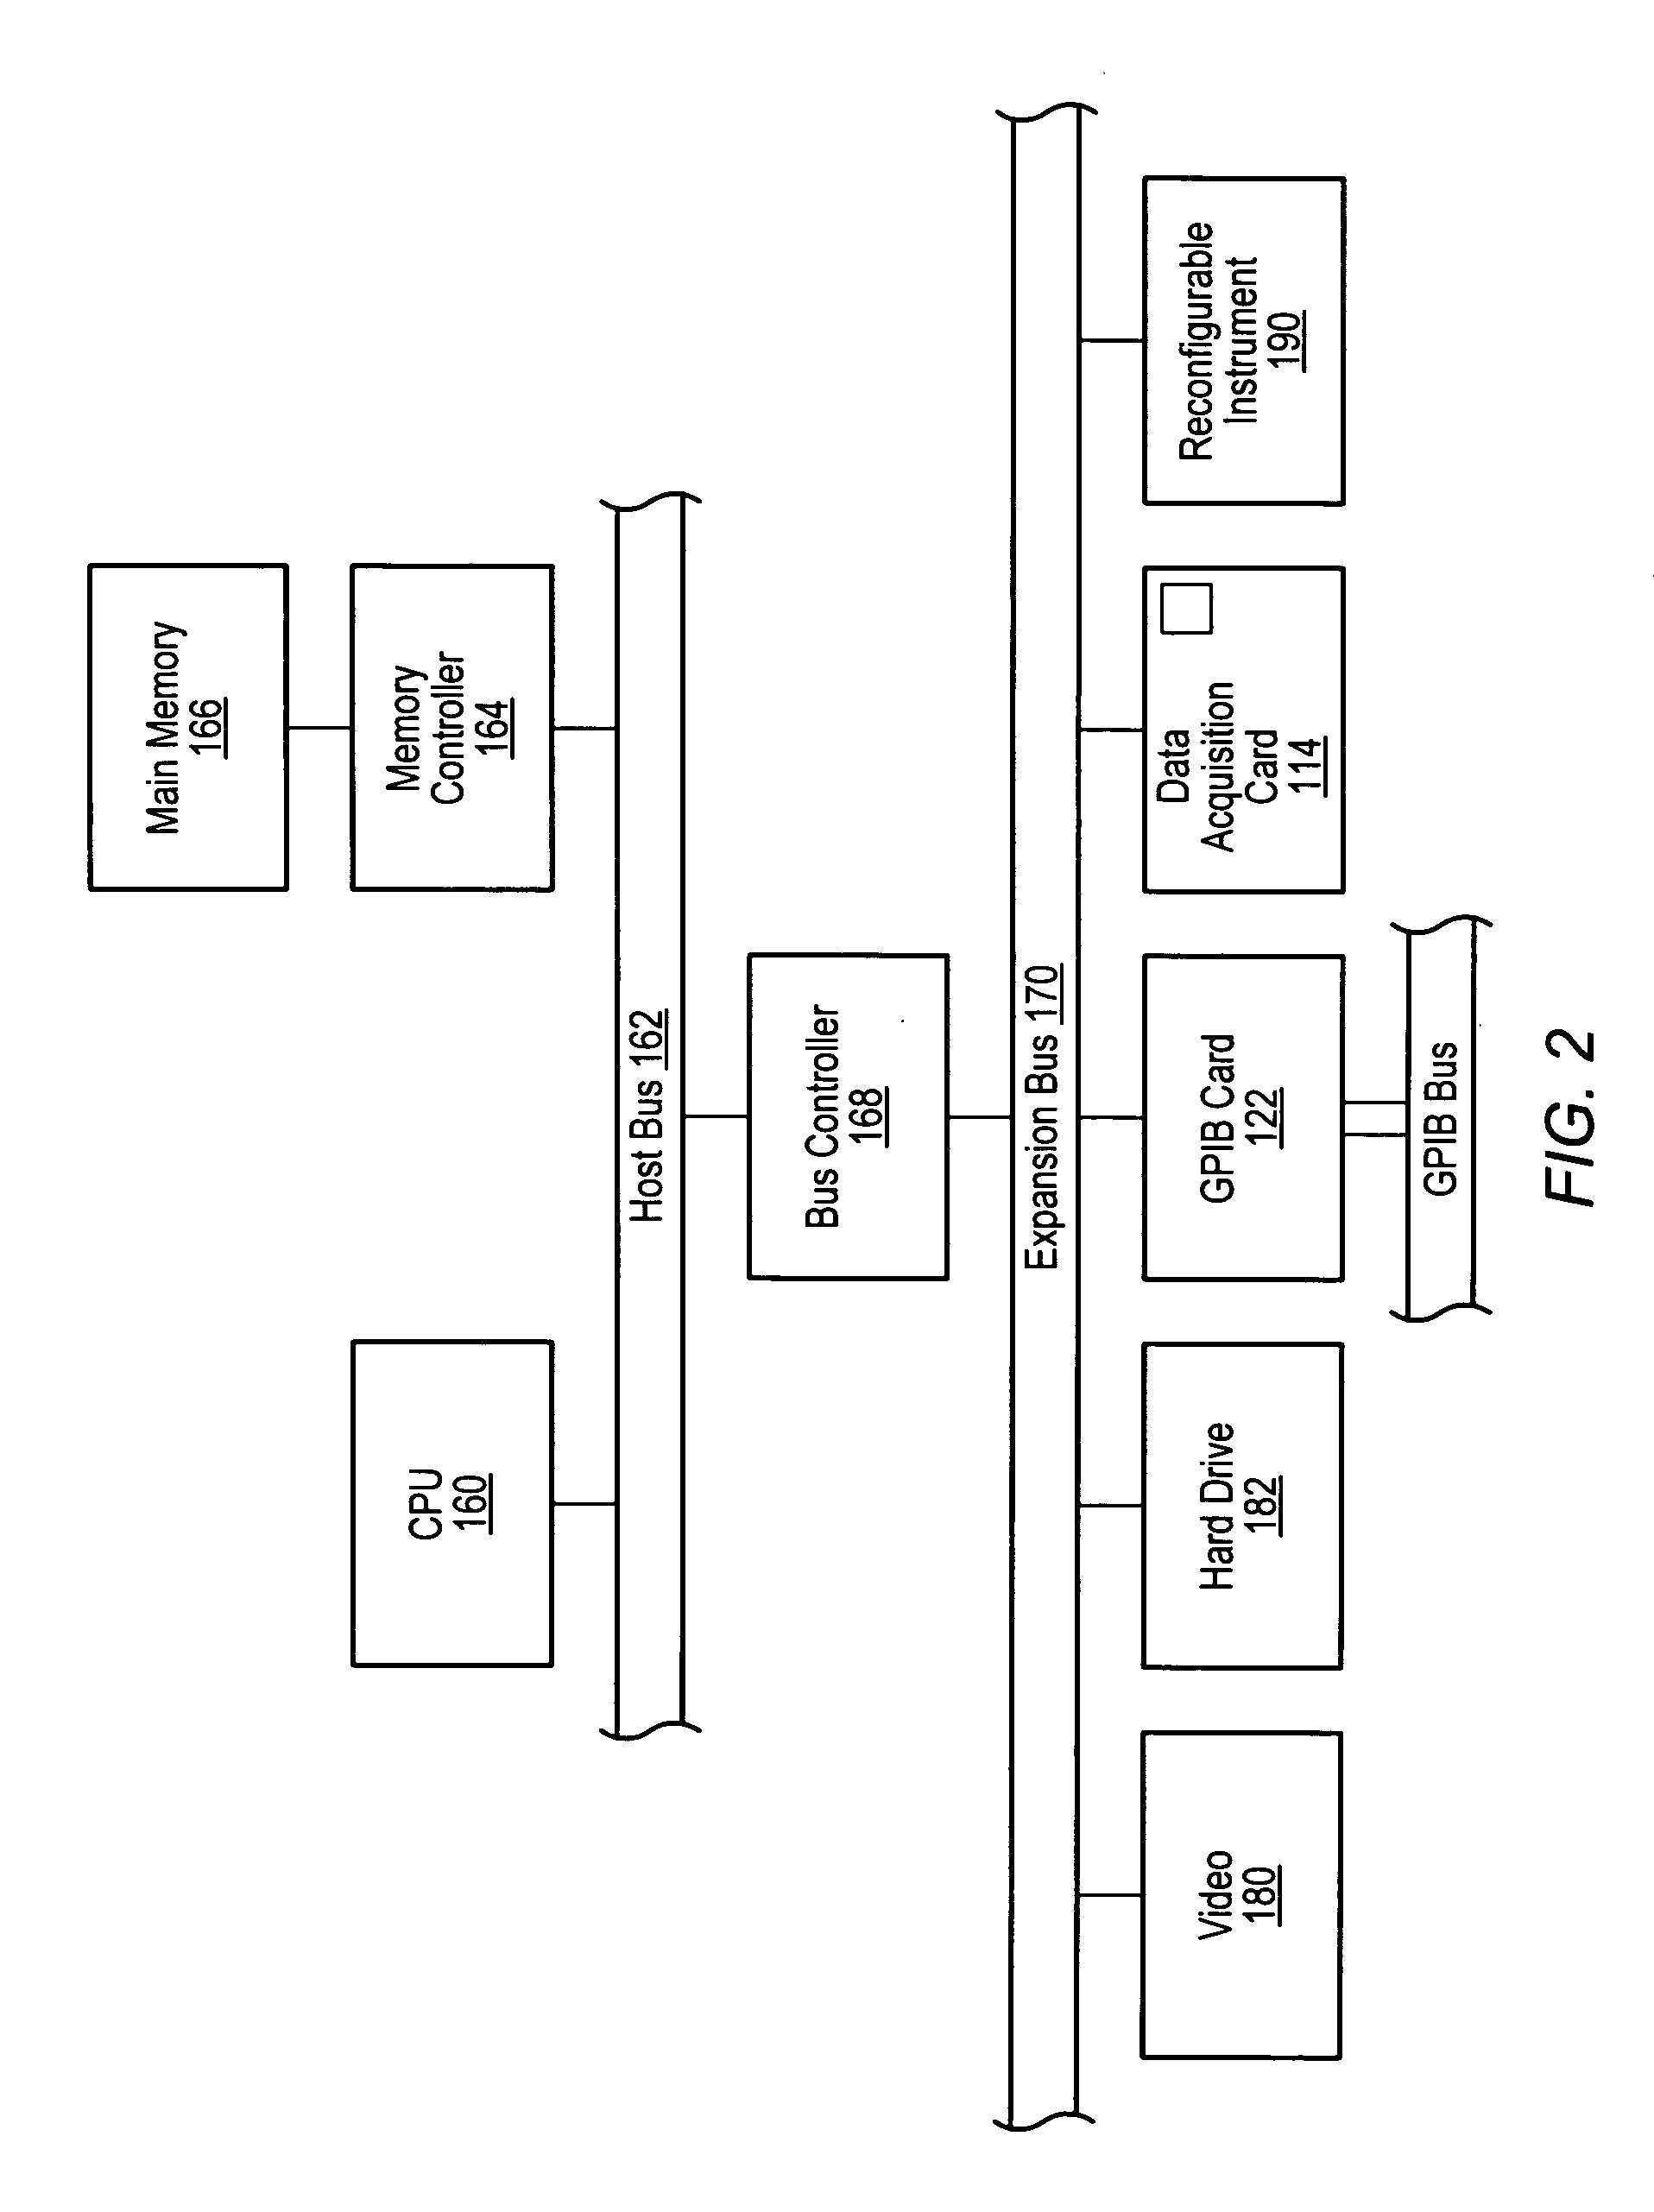 Test executive with external process isolation for user code modules